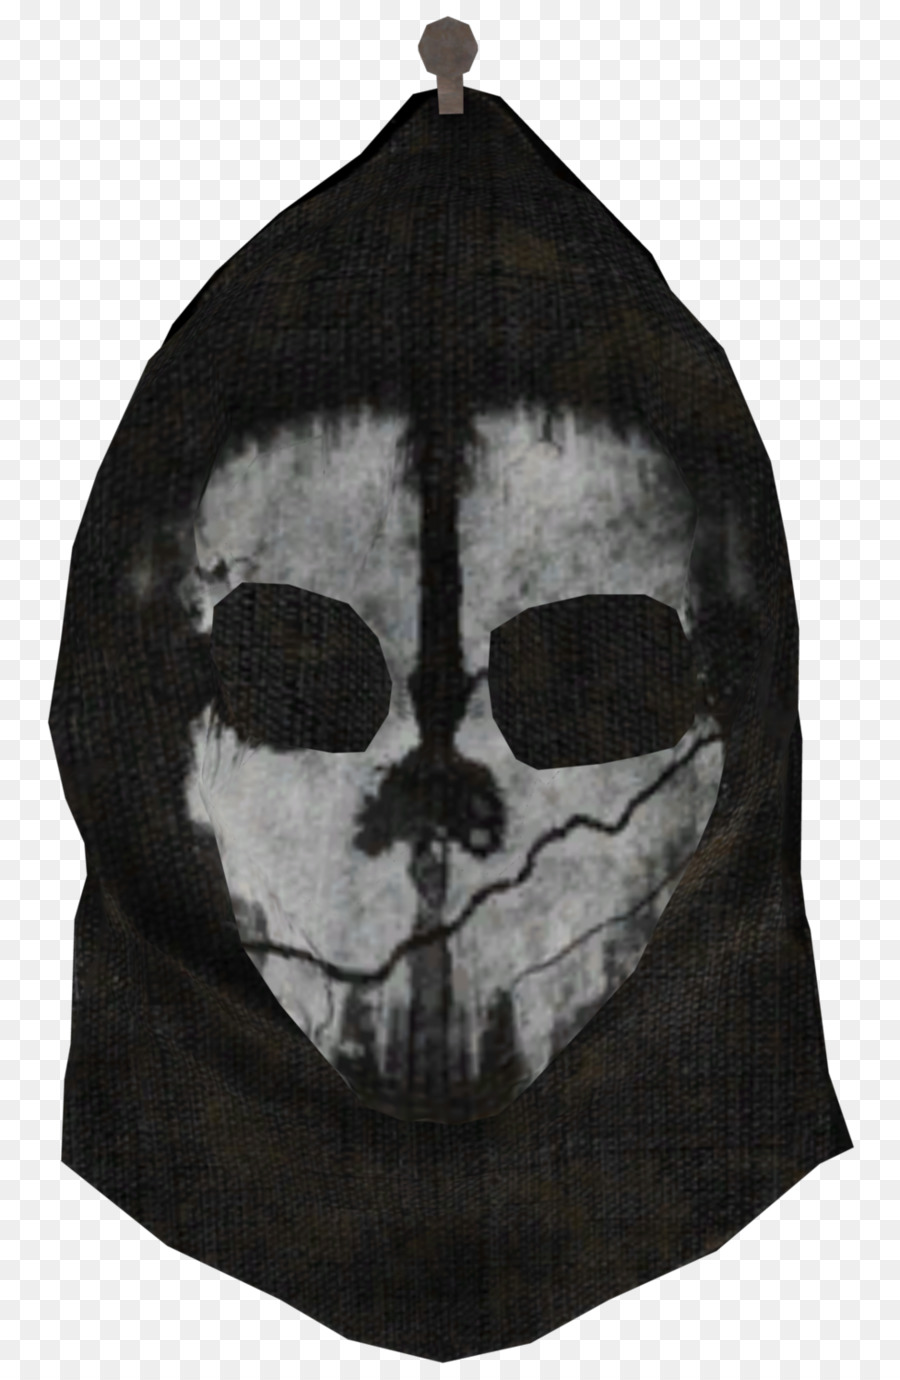 Call Of Duty Ghosts，Playstation 4 PNG